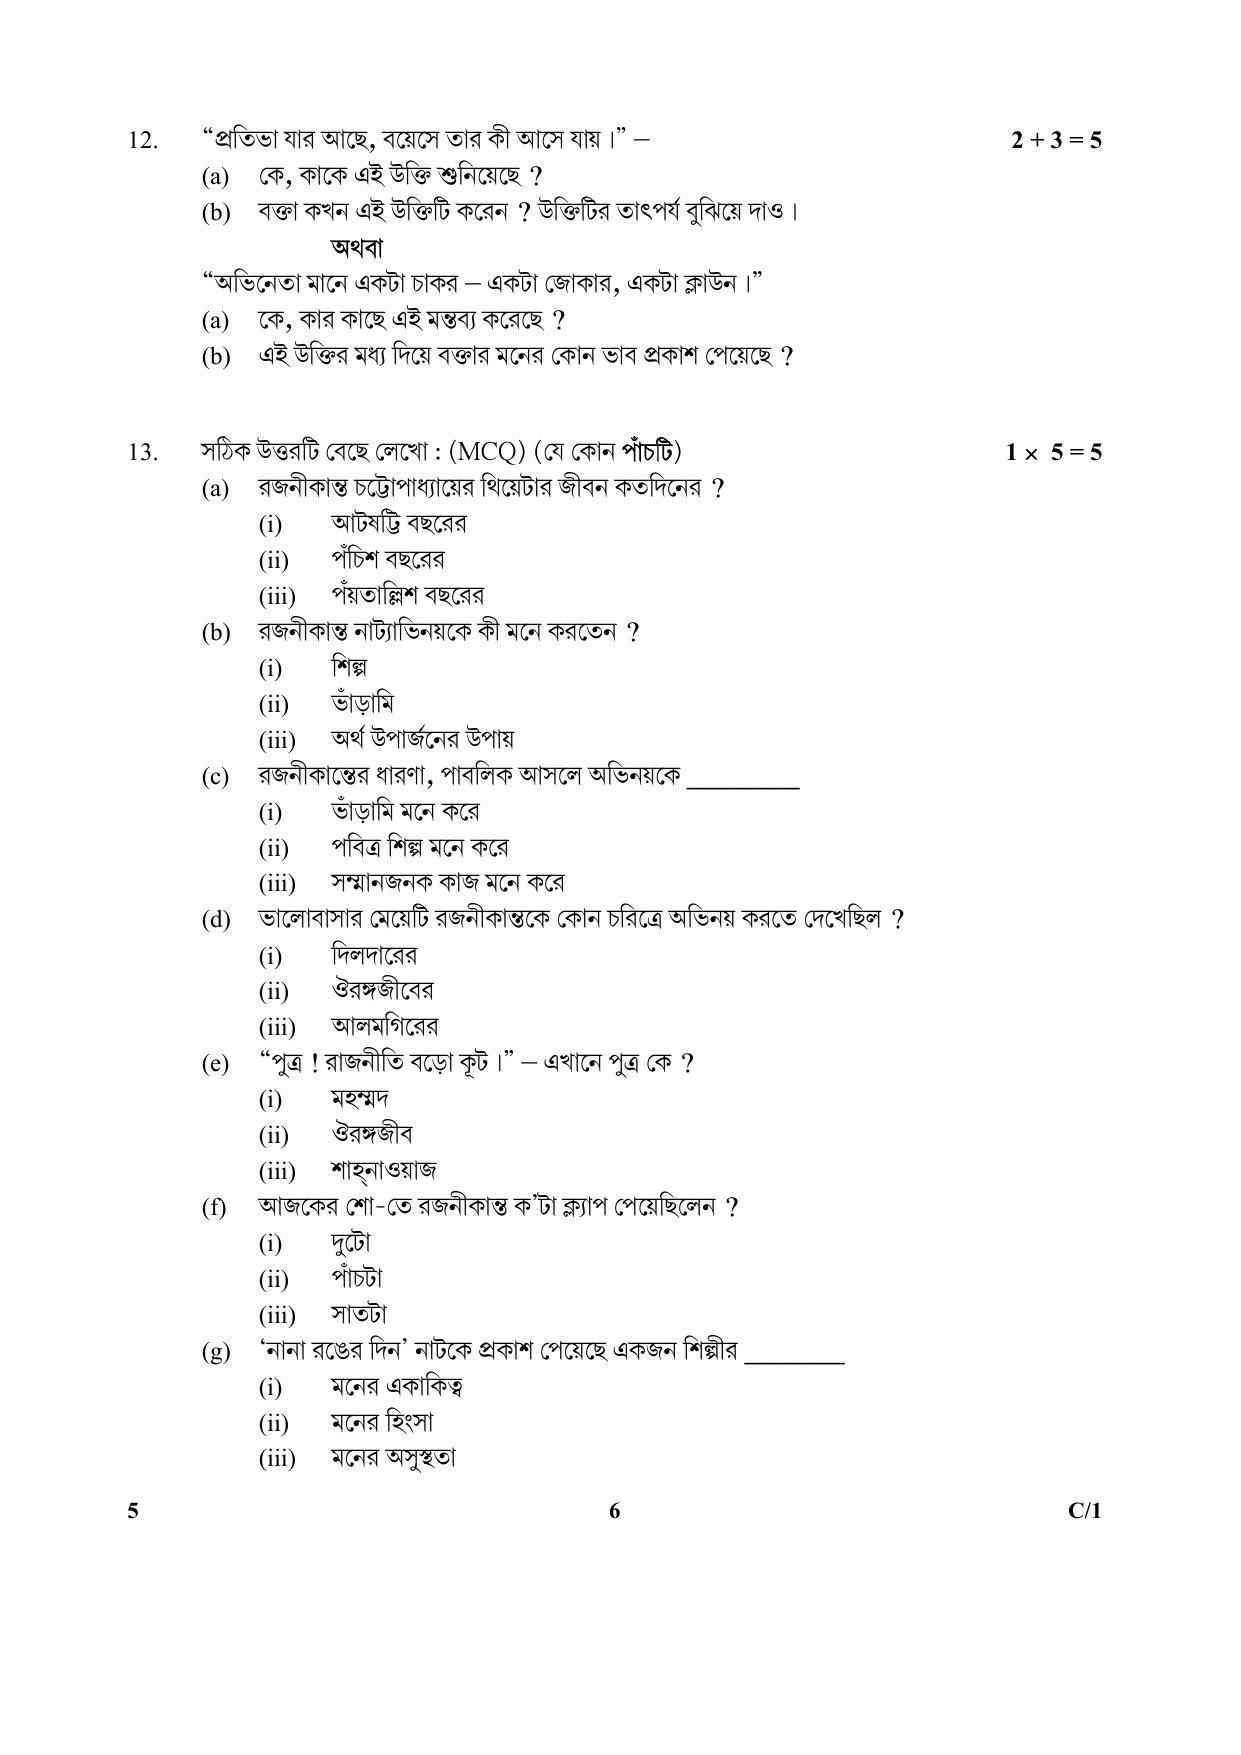 CBSE Class 12 5 (Bengali) 2018 Compartment Question Paper - Page 6